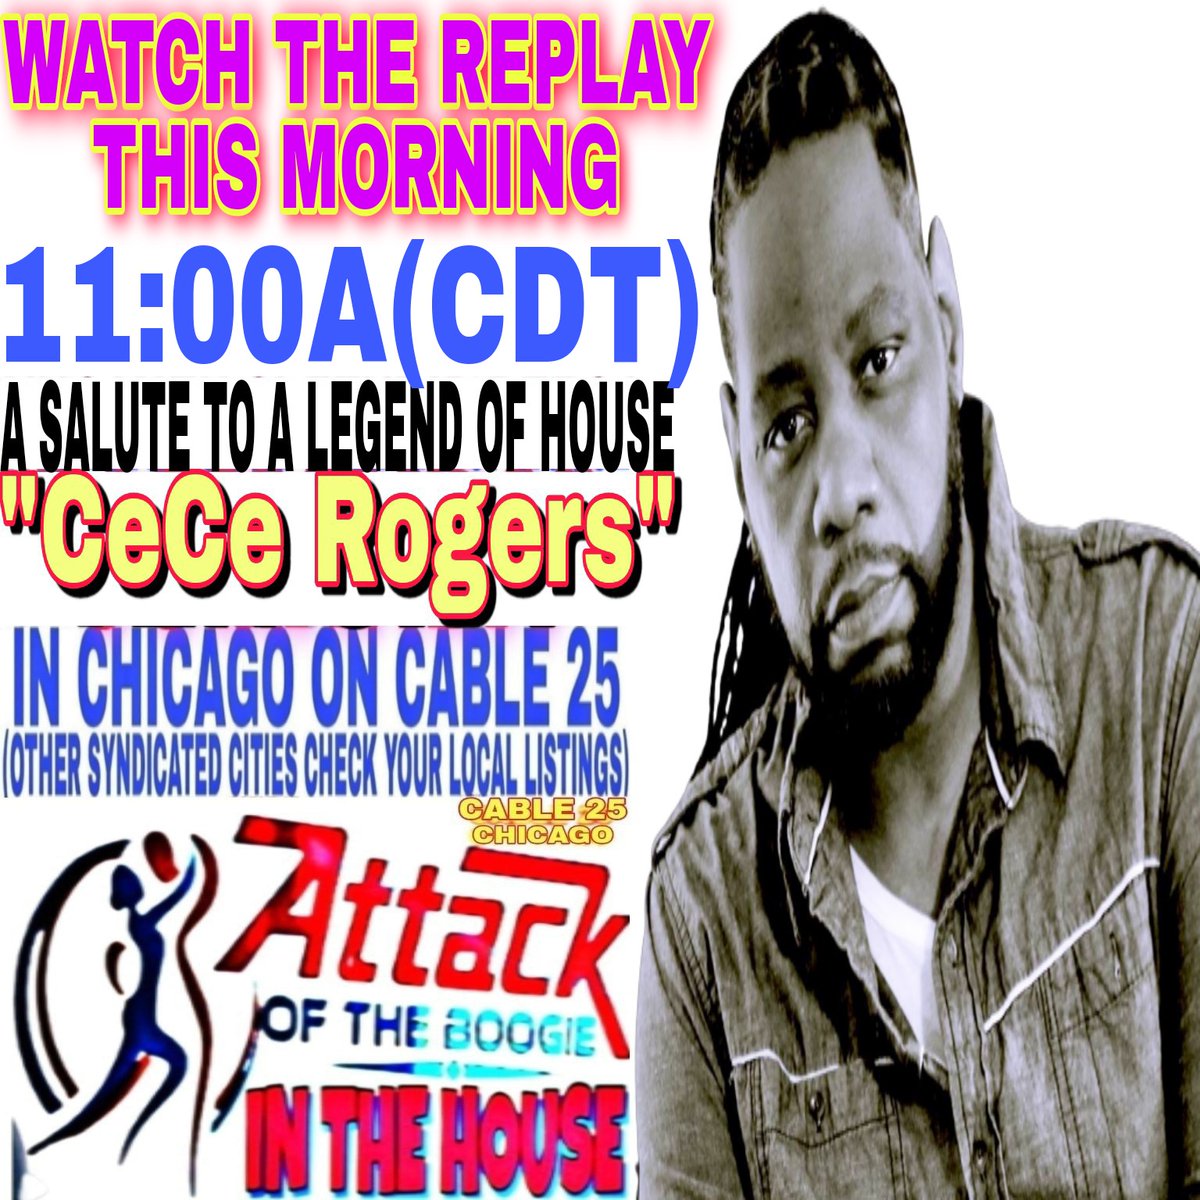 WATCH THE REPLAY THIS MORNING!
11:00A(CDT)
'ATTACK OF THE BOOGIE IN THE HOUSE'
PRESENTS A SALUTE TO A LEGEND OF HOUSE
'CeCe Rogers'
IN CHICAGO ON CABLE 25
(OTHER SYNDICATED CITIES CHECK YOUR LOCAL LISTINGS)

@cecerogers #cecerogers #marcusmixx #HouseMusic #radio #edmlife #music